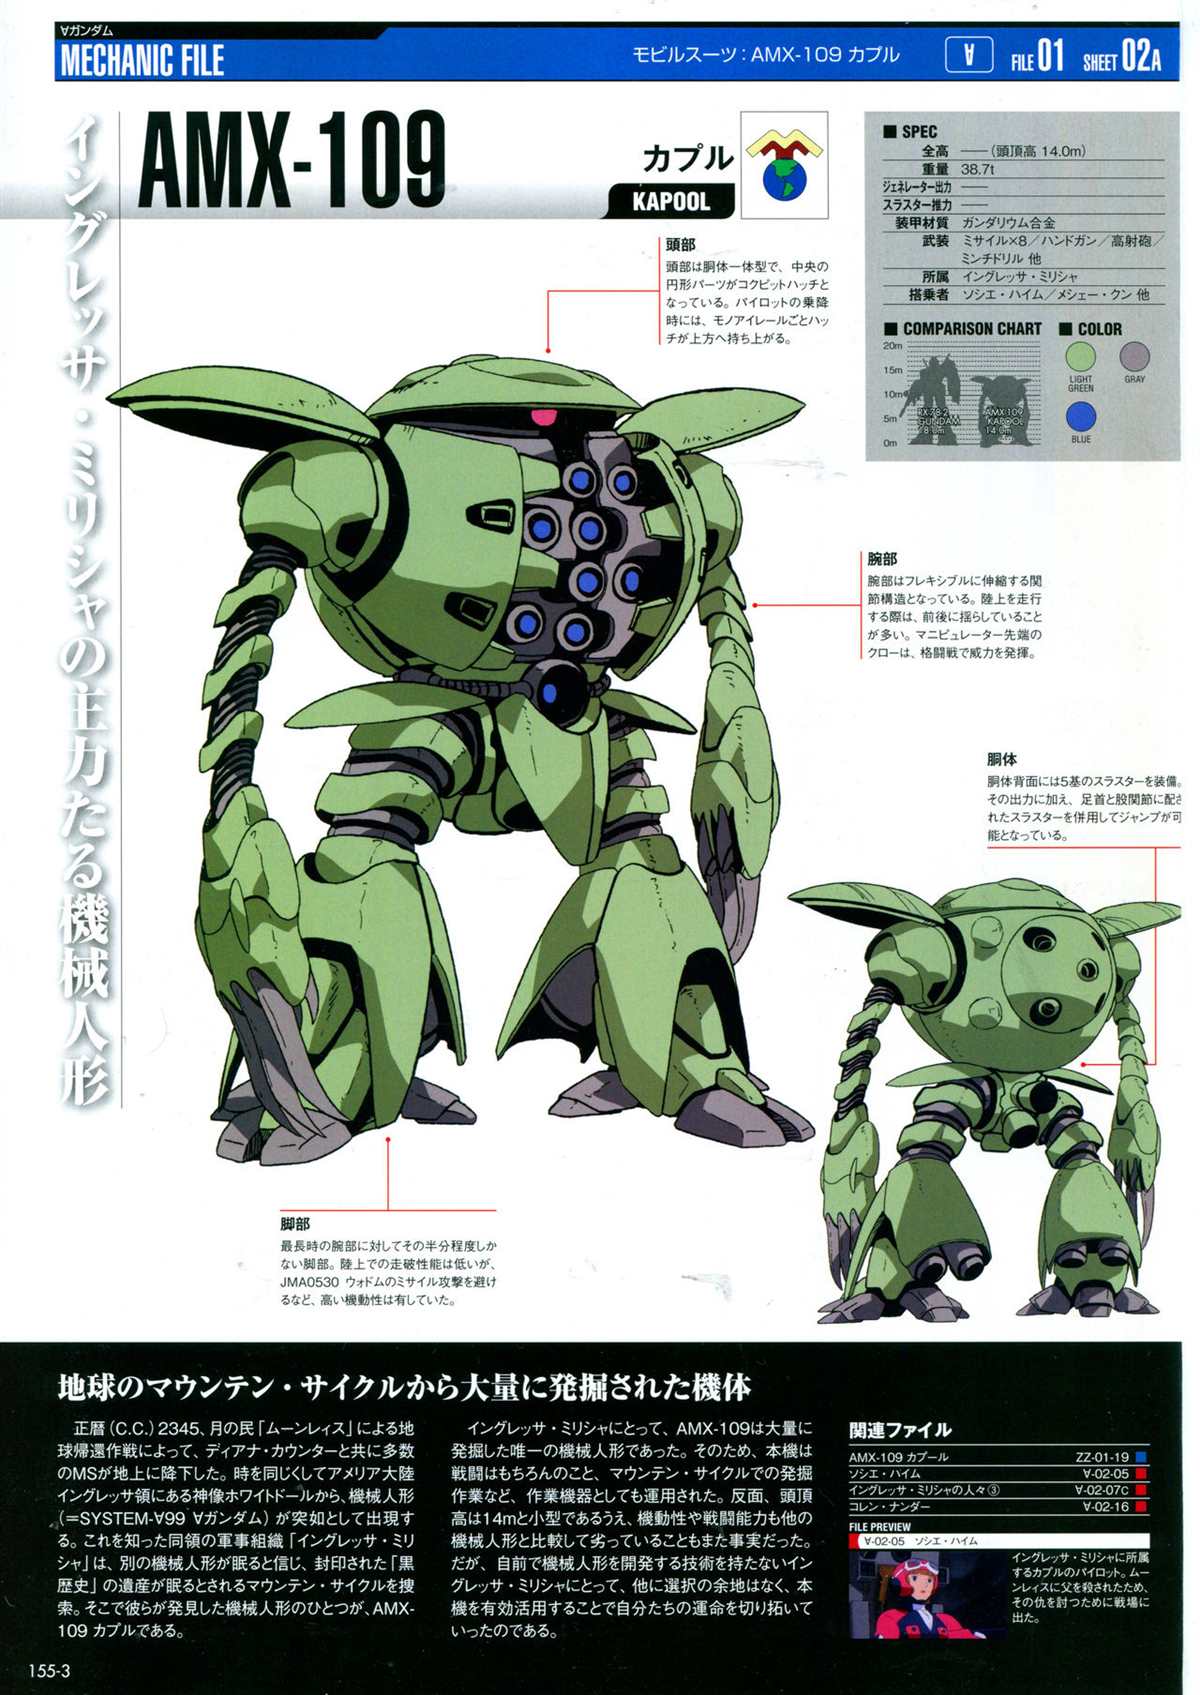 The Official Gundam Perfect File  - 第155話 - 1